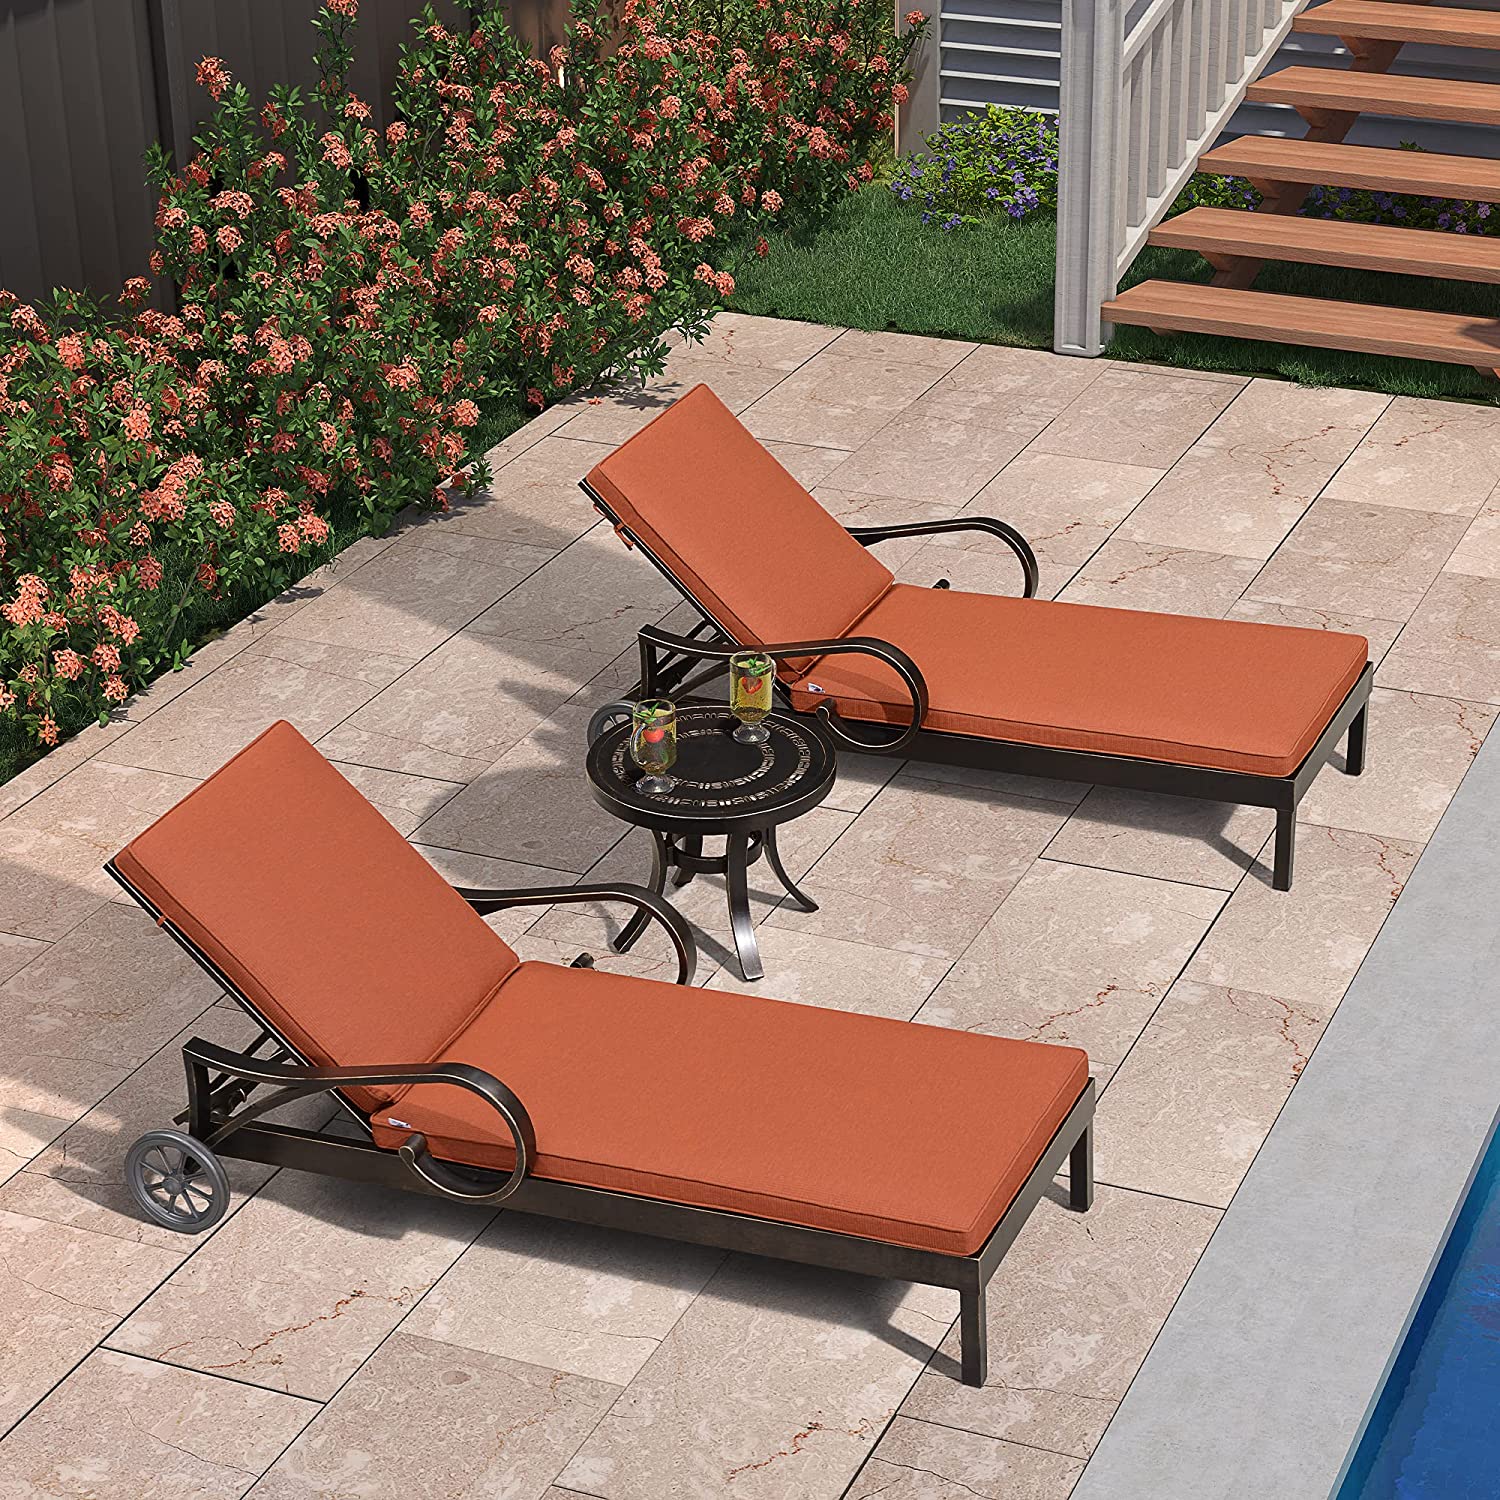 PURPLE LEAF Outdoor Metal Chaise Lounge Chair Set Outside Cast Aluminum Adjustable Chairs with Side Table and Cushion - image 2 of 8